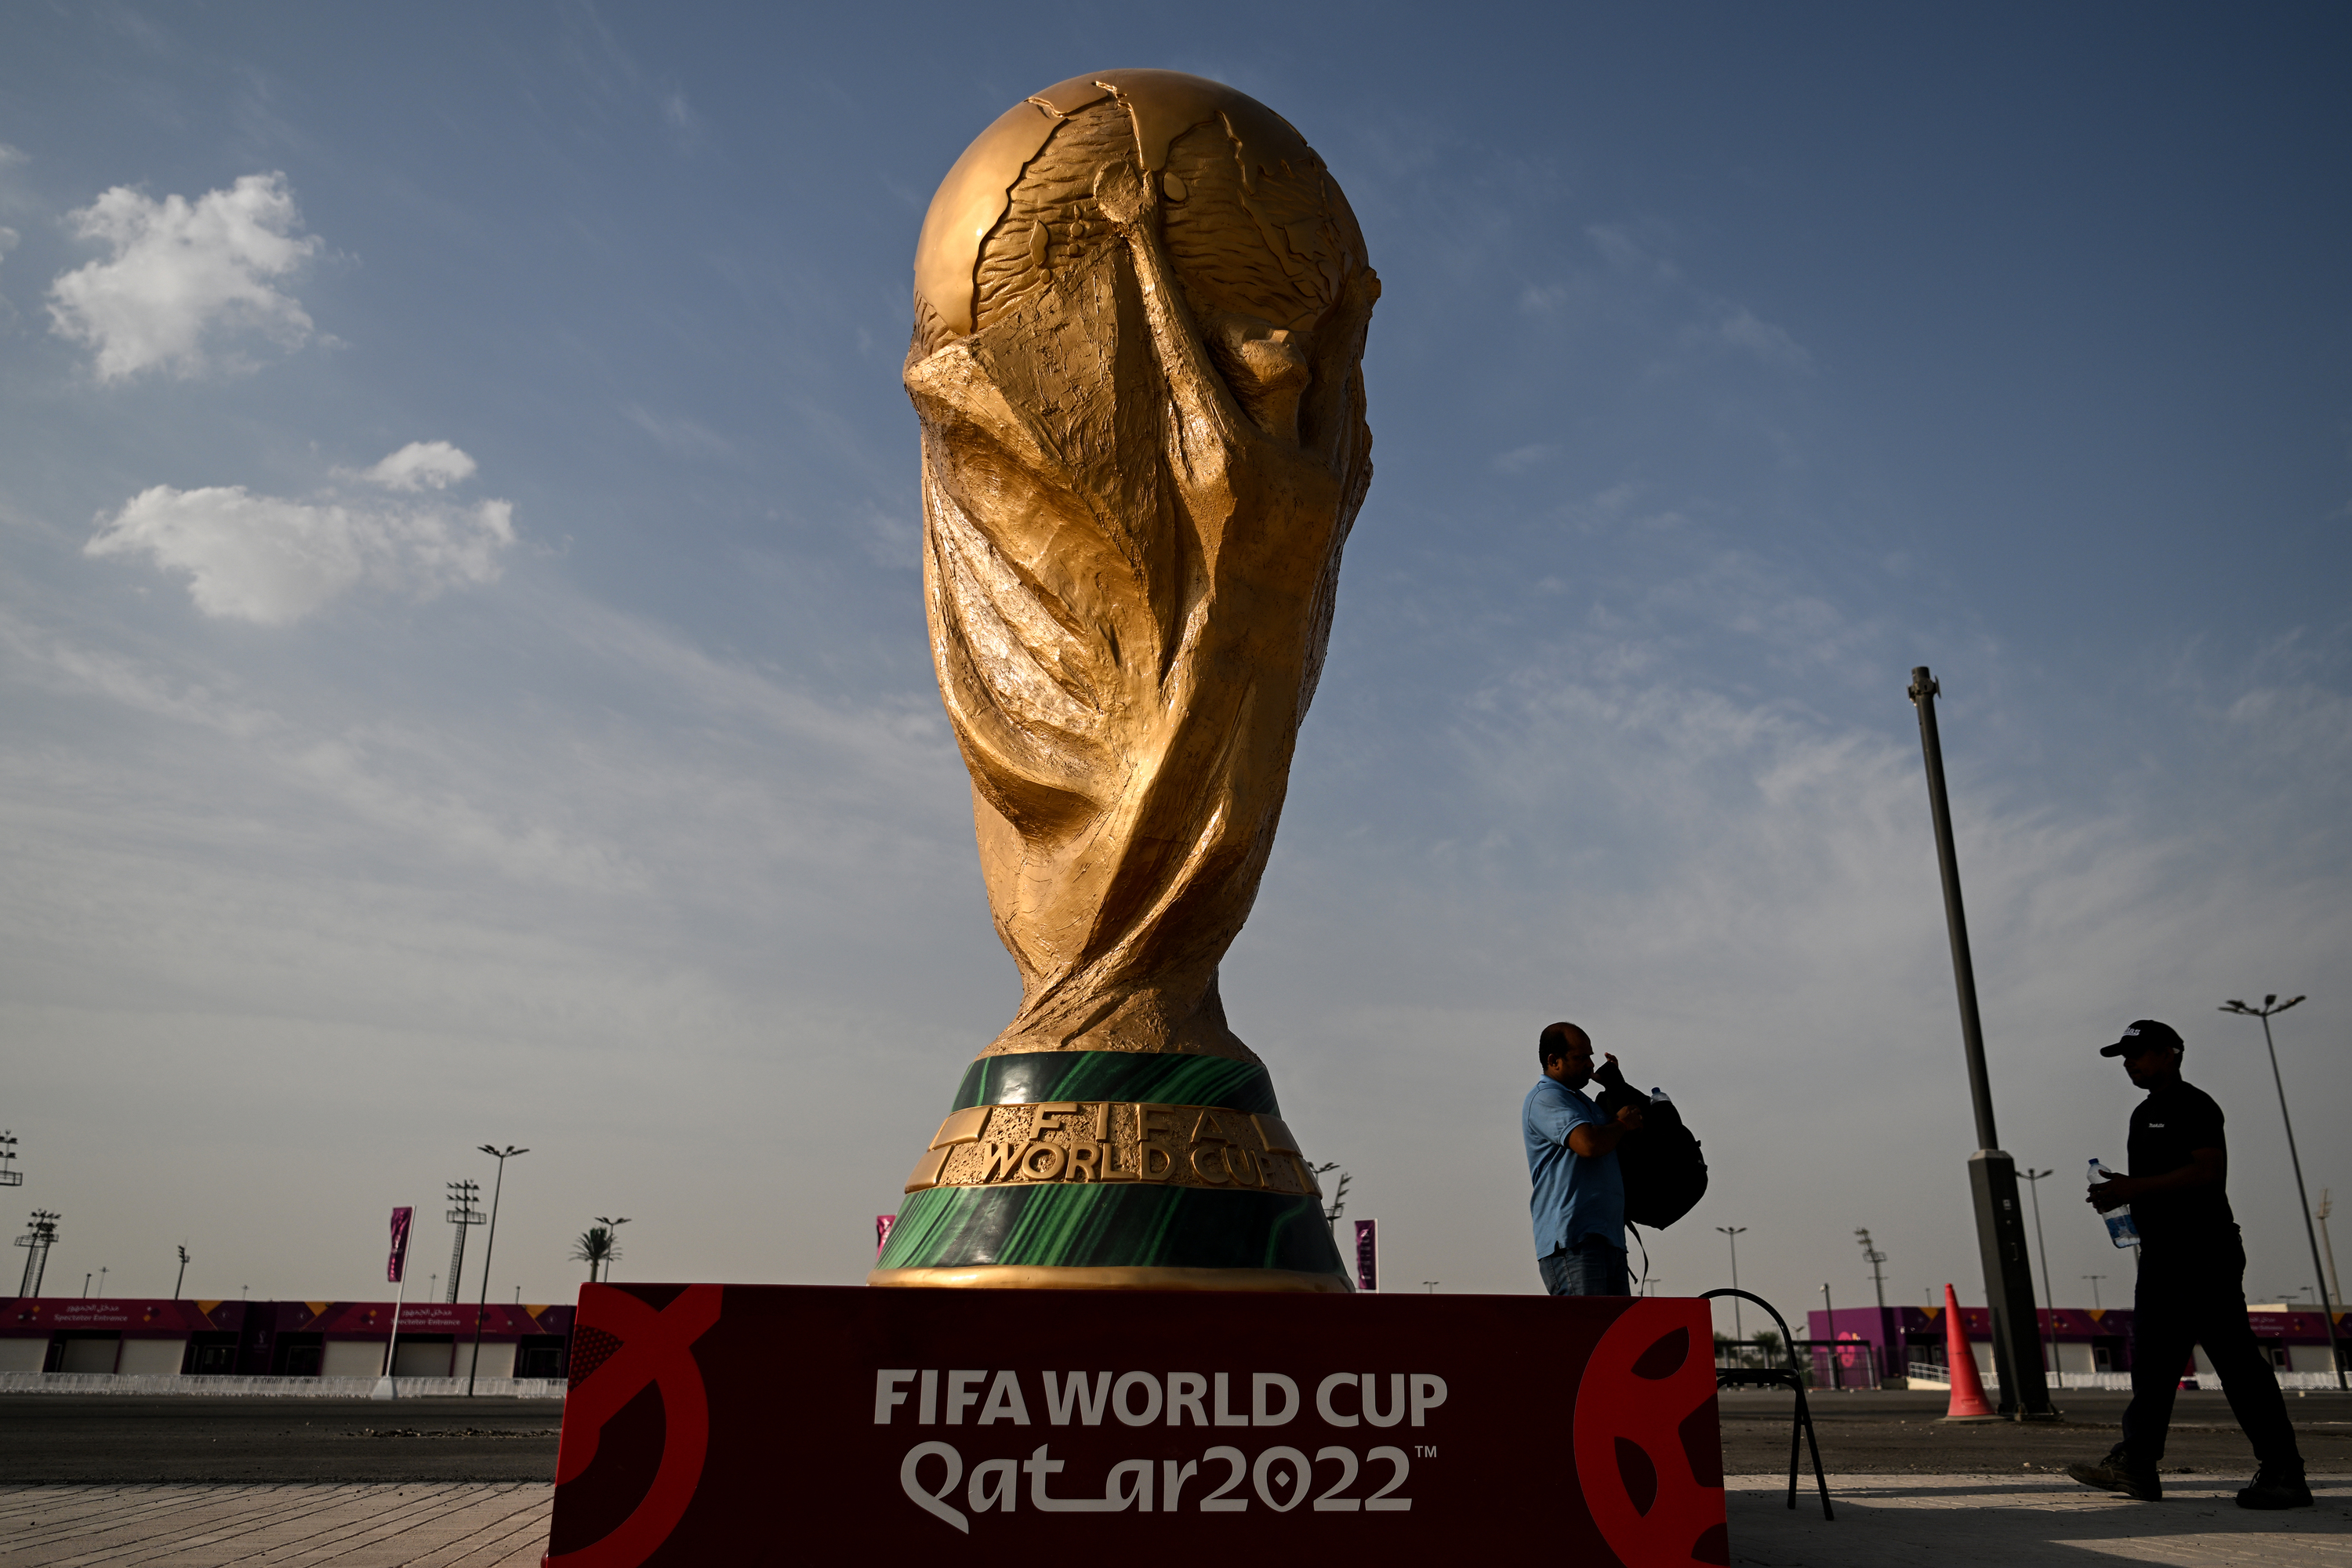 Where to watch the FIFA World Cup Qatar 2022 in Hong Kong